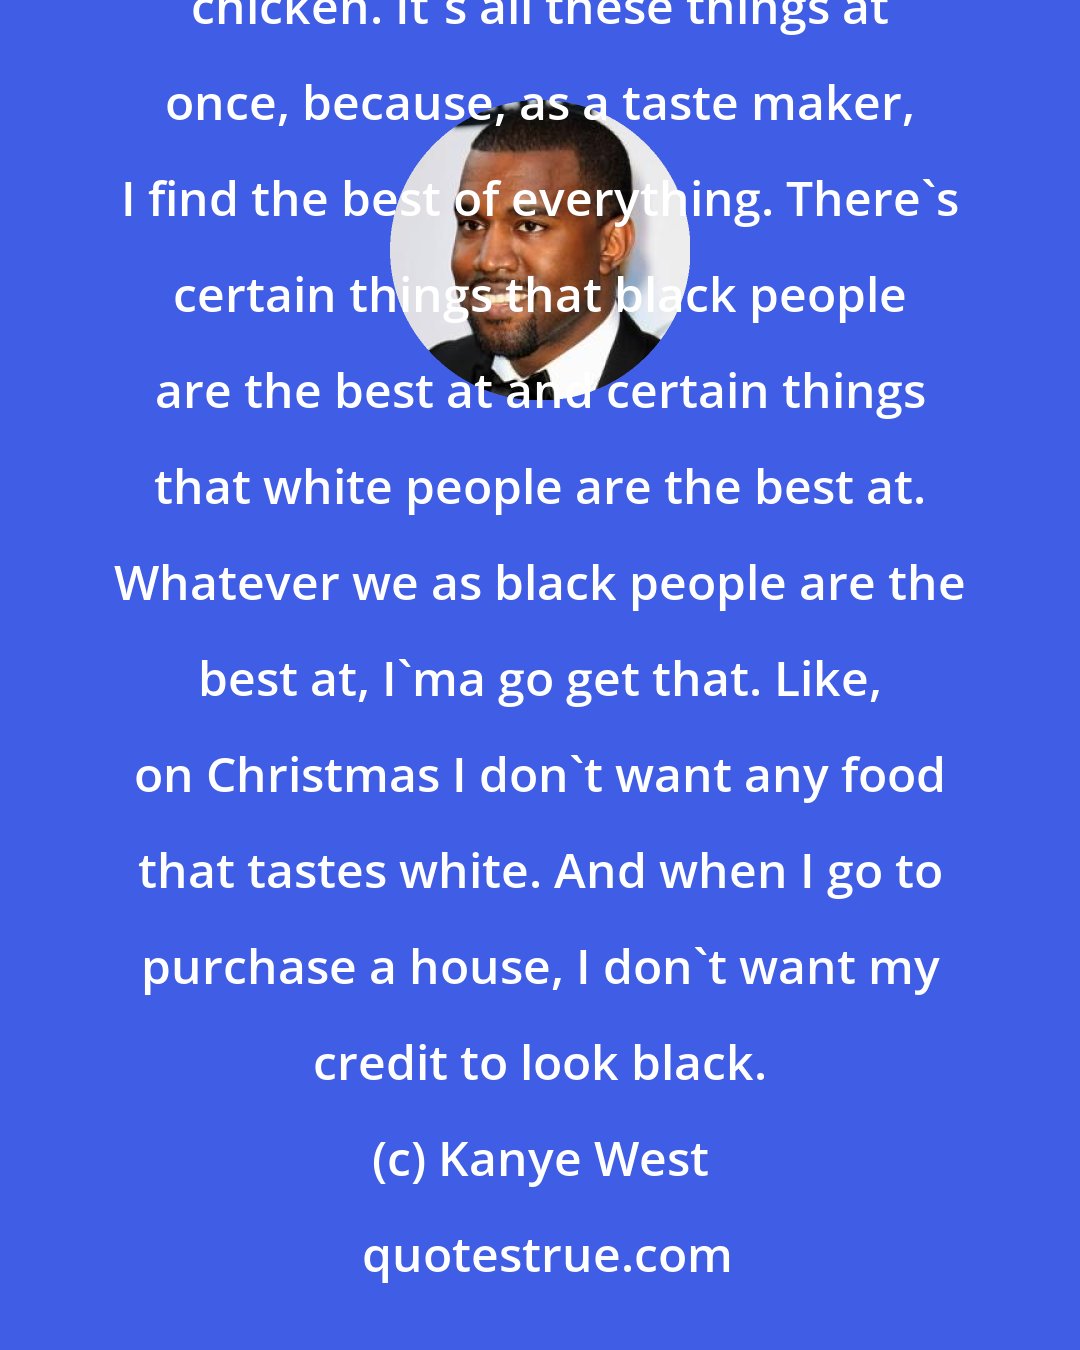 Kanye West: I'm a pop enigma. I live and breathe every element in life. I rock a bespoke suit and I go to Harold's for fried chicken. It's all these things at once, because, as a taste maker, I find the best of everything. There's certain things that black people are the best at and certain things that white people are the best at. Whatever we as black people are the best at, I'ma go get that. Like, on Christmas I don't want any food that tastes white. And when I go to purchase a house, I don't want my credit to look black.